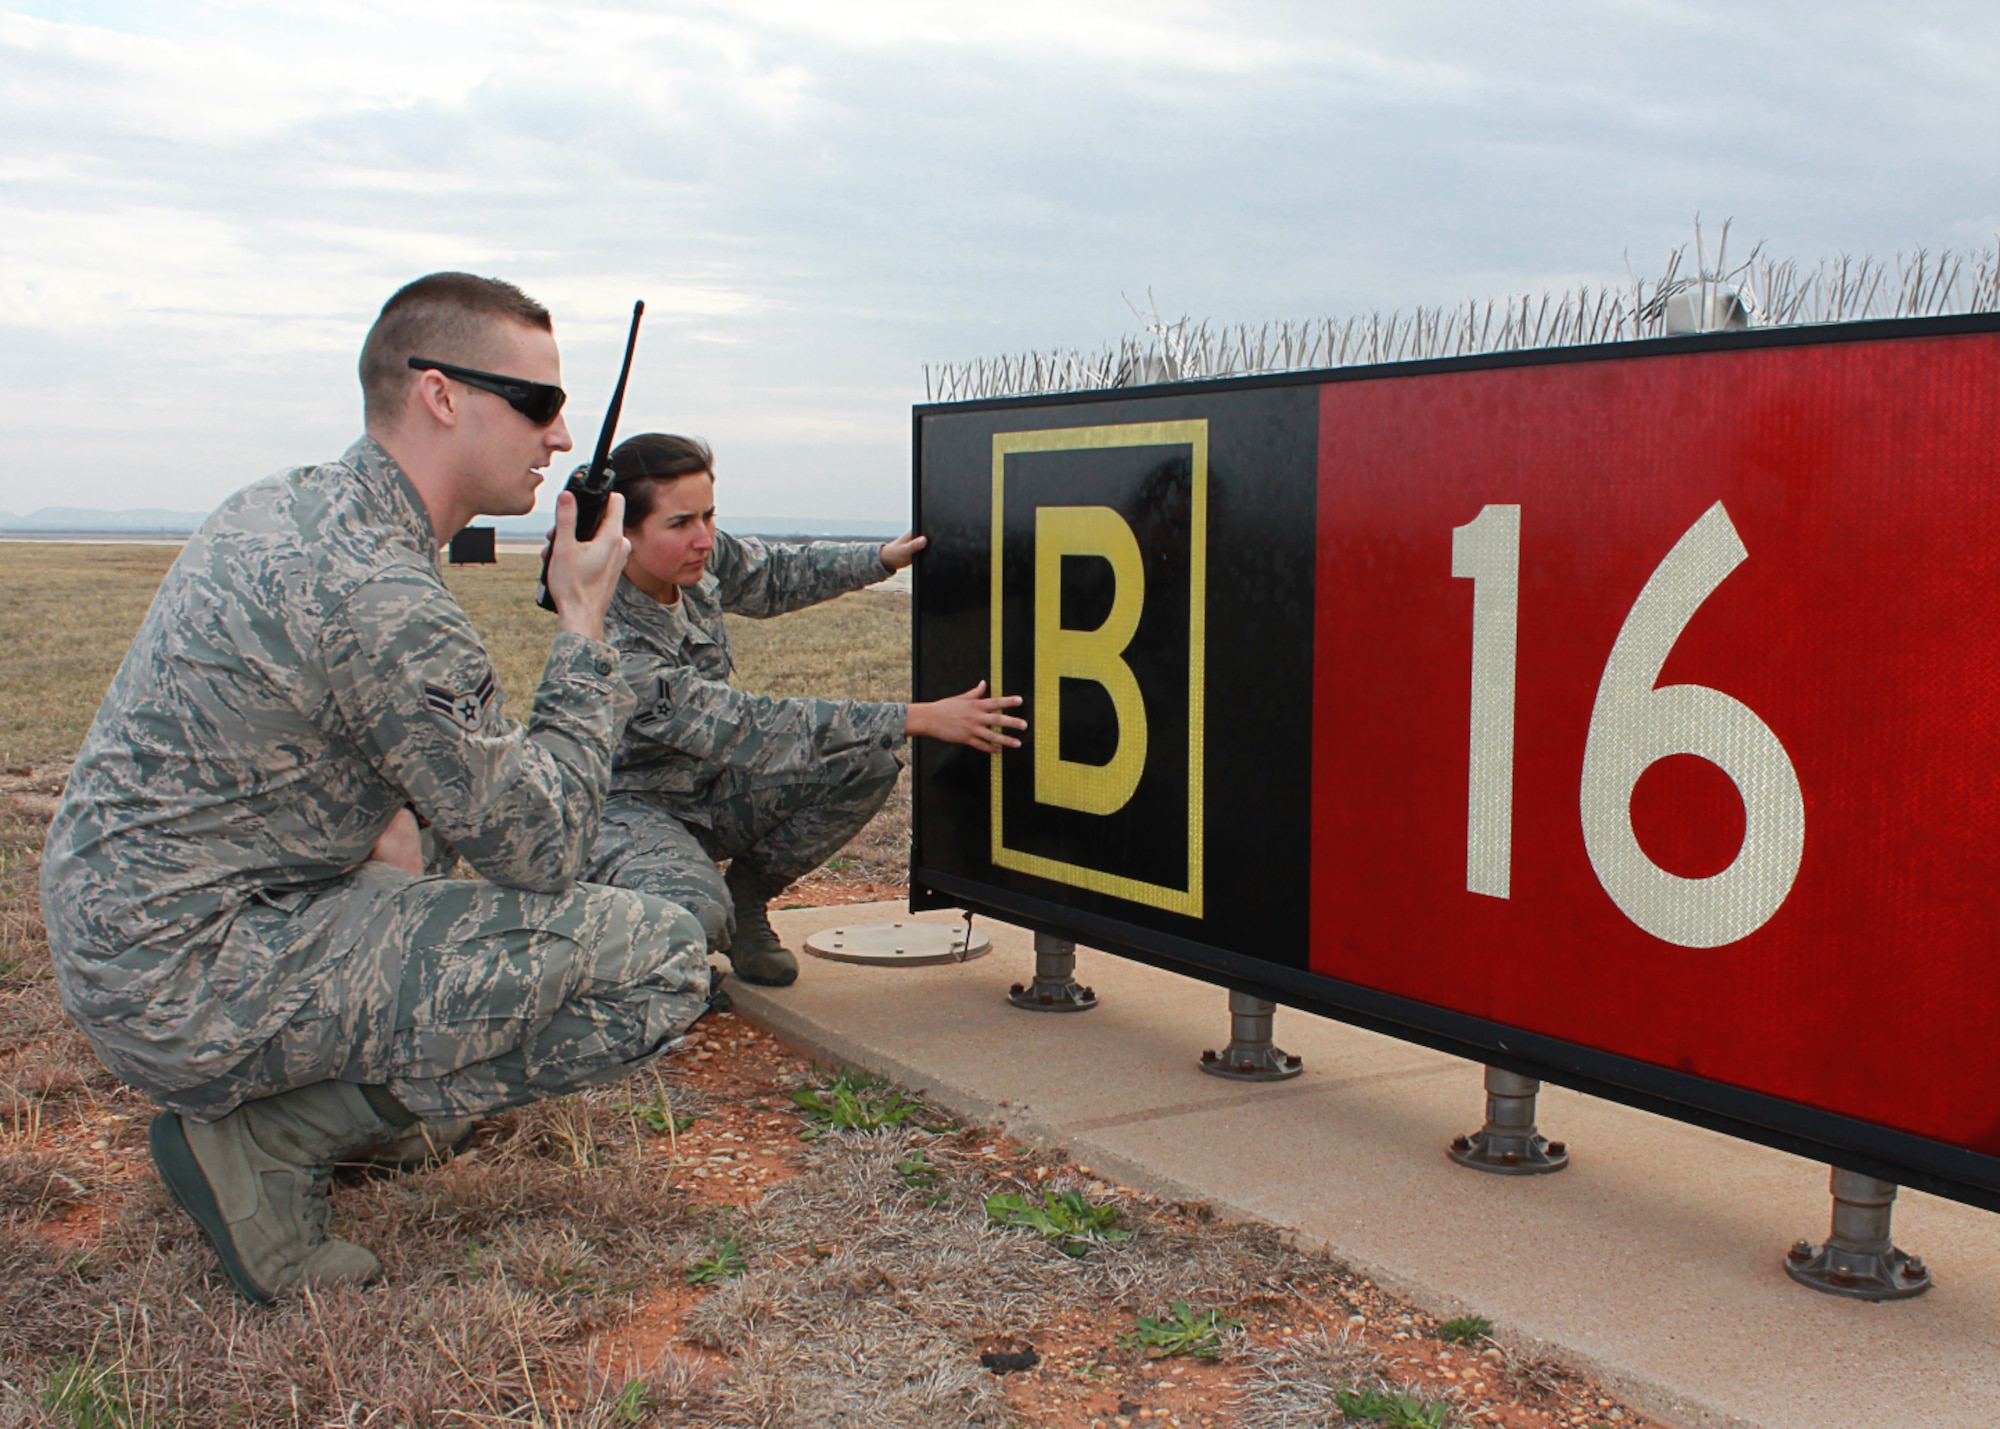 Airman 1st Class Laramie Combs and Airman 1st Class Tori Reyes, 7th Operations Support Squadron, notify the Dyess airfield operations counter about airfield signage concerns during a recent air traffic system evaluation at Dyess Air Force Base, Texas. The 7th OSS, Airfield Operations Flight, Airfield Management was recently awarded the Headquarters Air Force Ronald B. McCarty Airfield Management Facility of the Year of 2011. (U.S. Air Force photo by Senior Airman Evan Stewart/Released)
